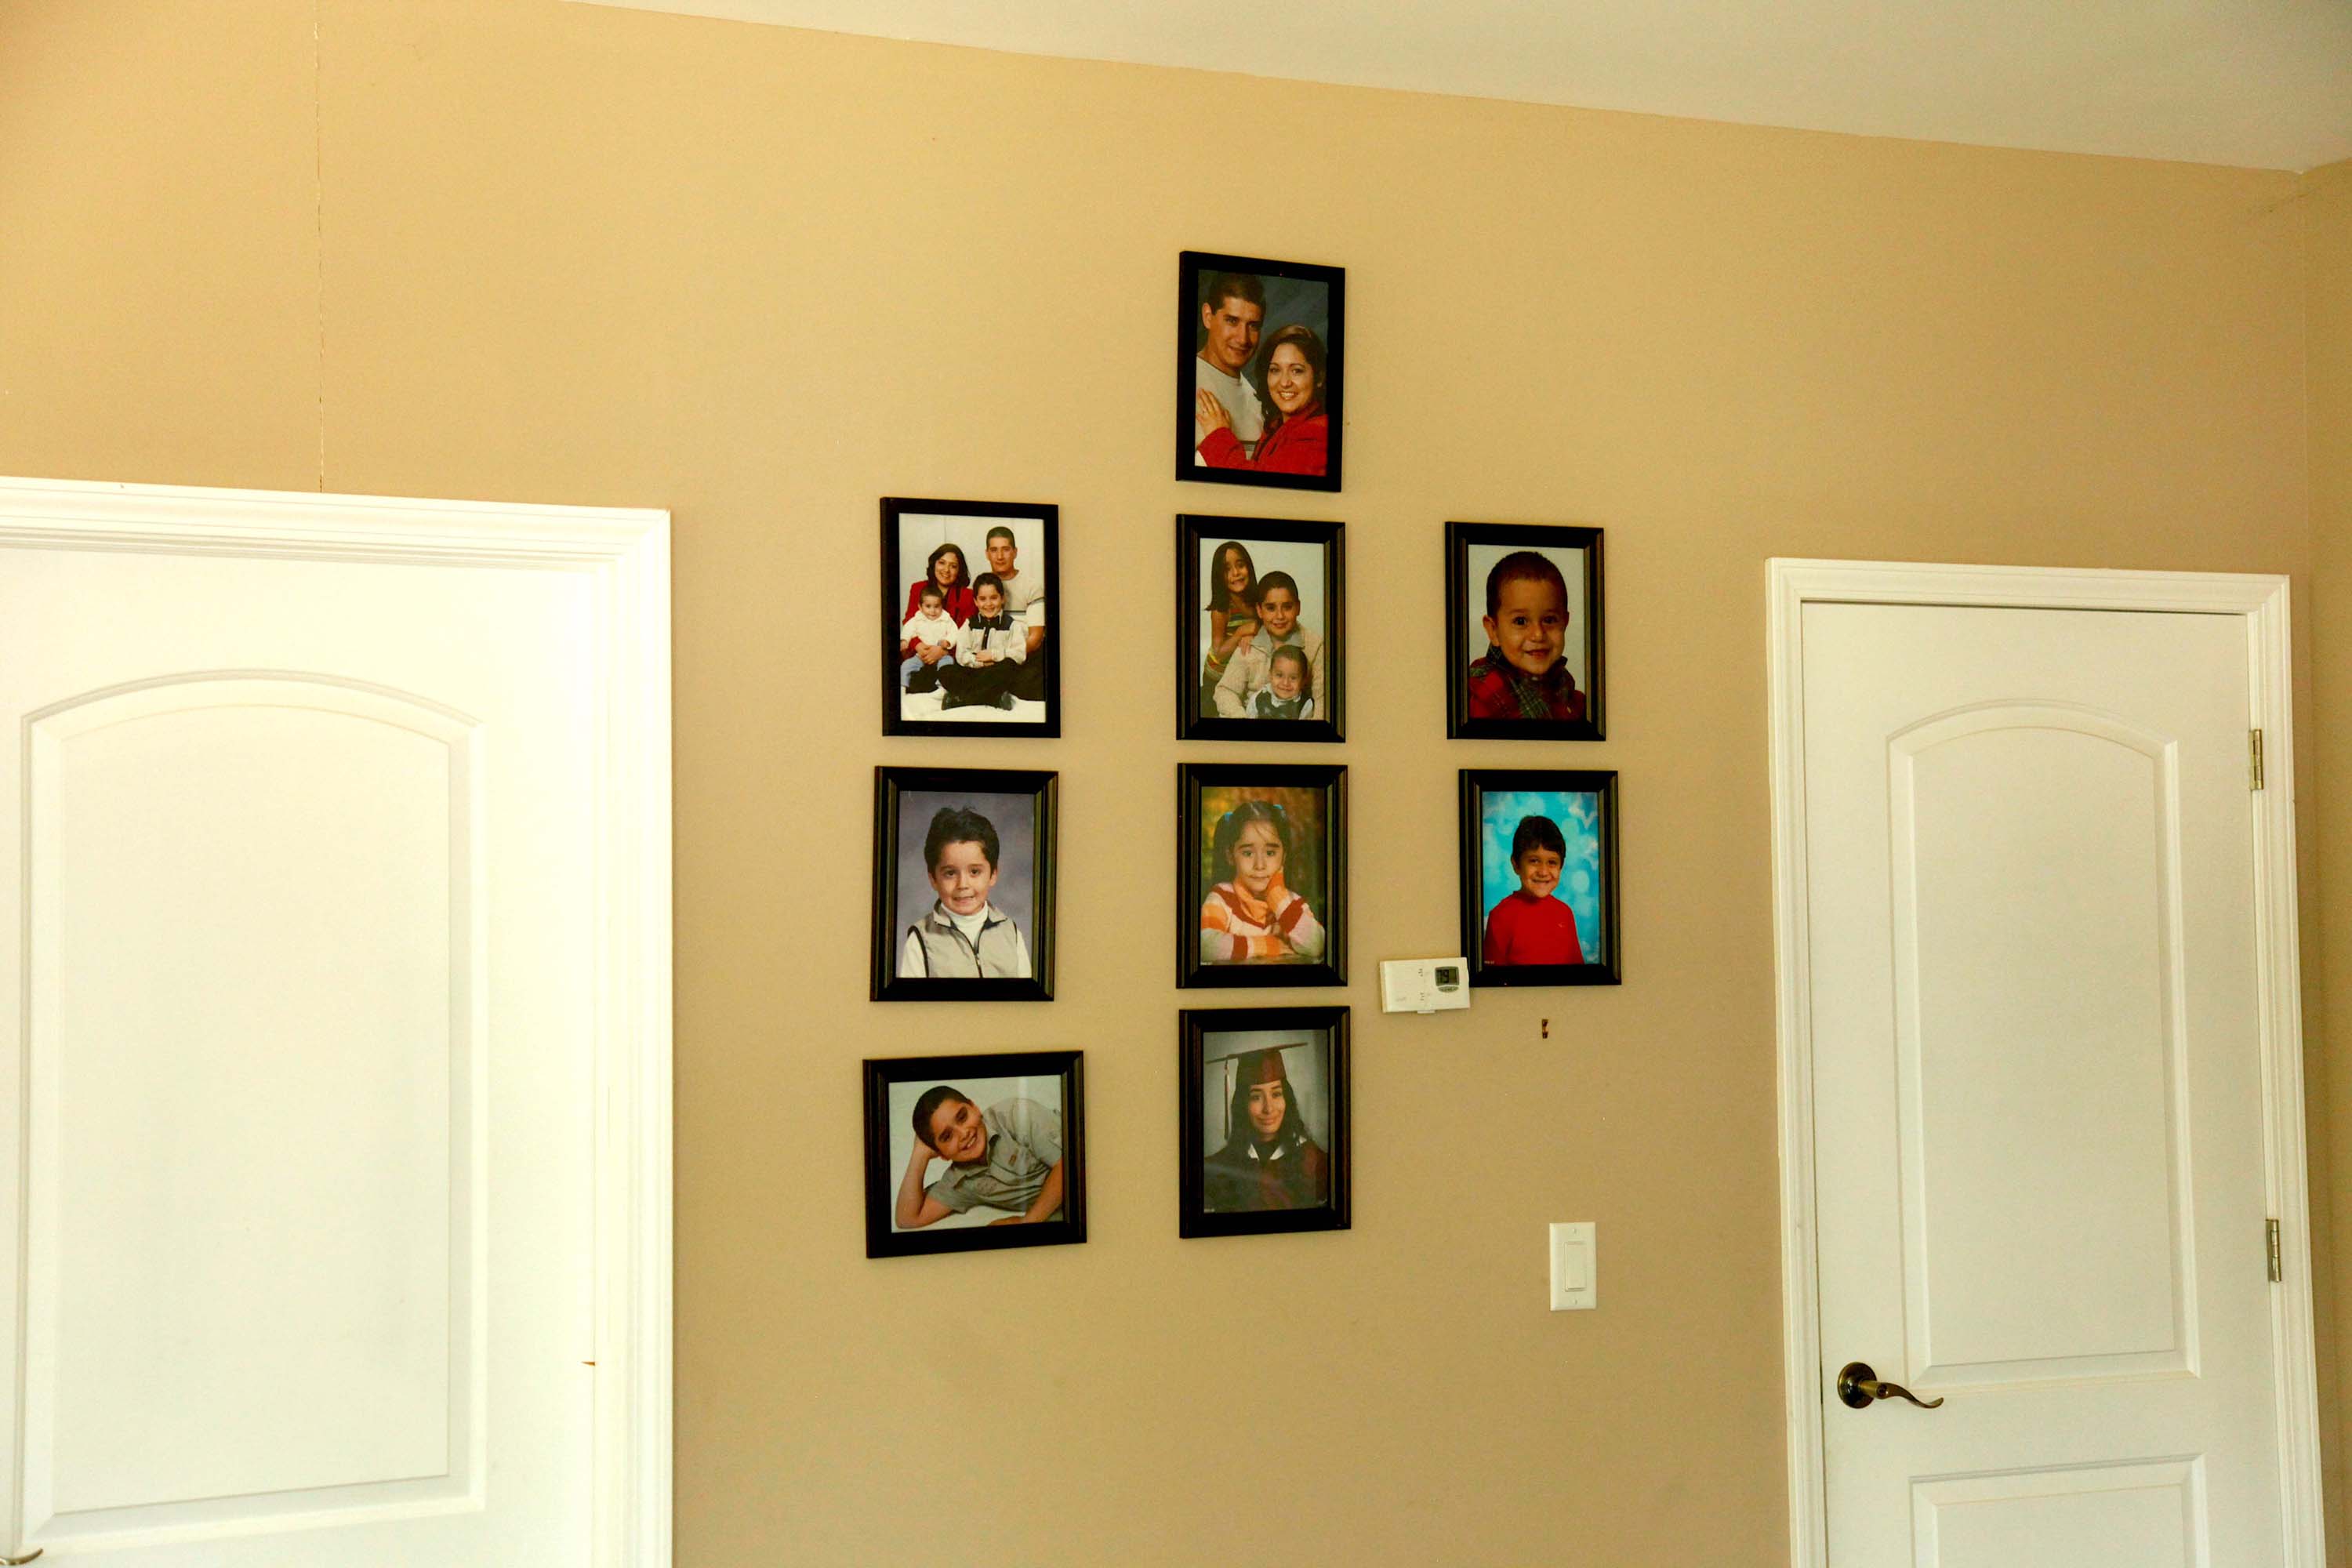 Framed photos adorn a mustard-colored wall, displaying the Avalos family through the years.